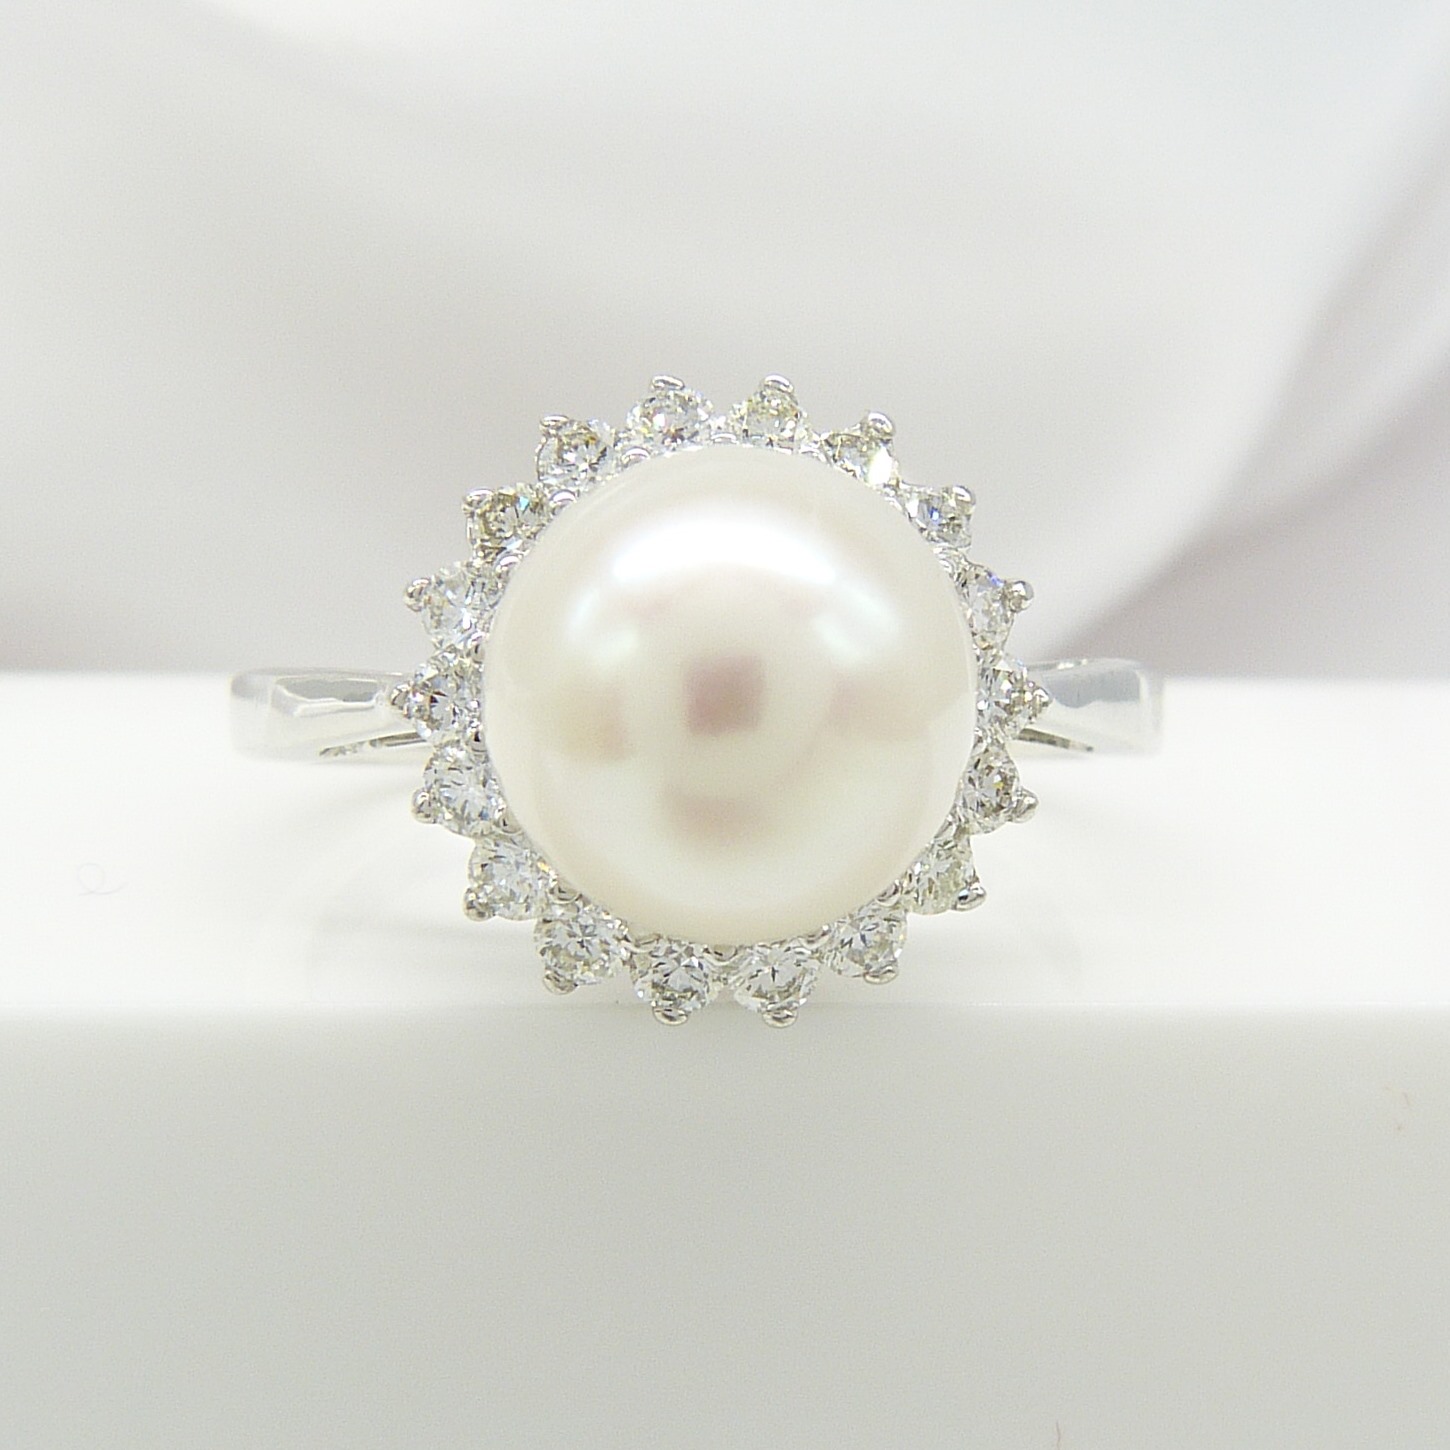 White gold round cultured freshwater pearl and diamond cluster ring in a classic style - Image 3 of 8